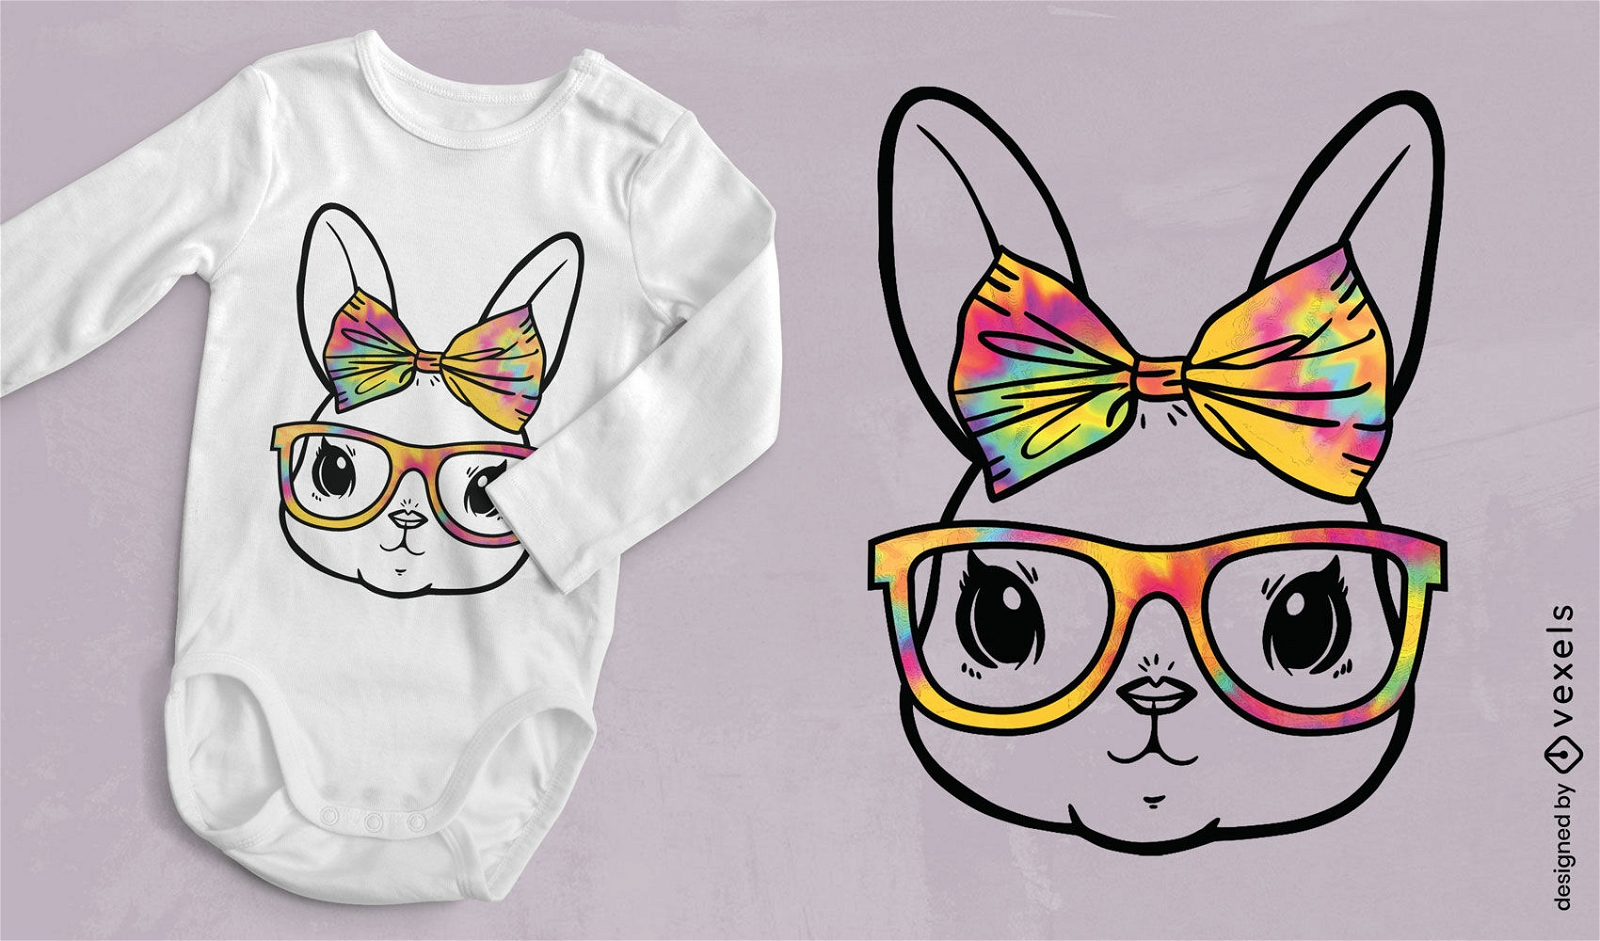 Rabbit with tye dye bow and glasses t-shirt design